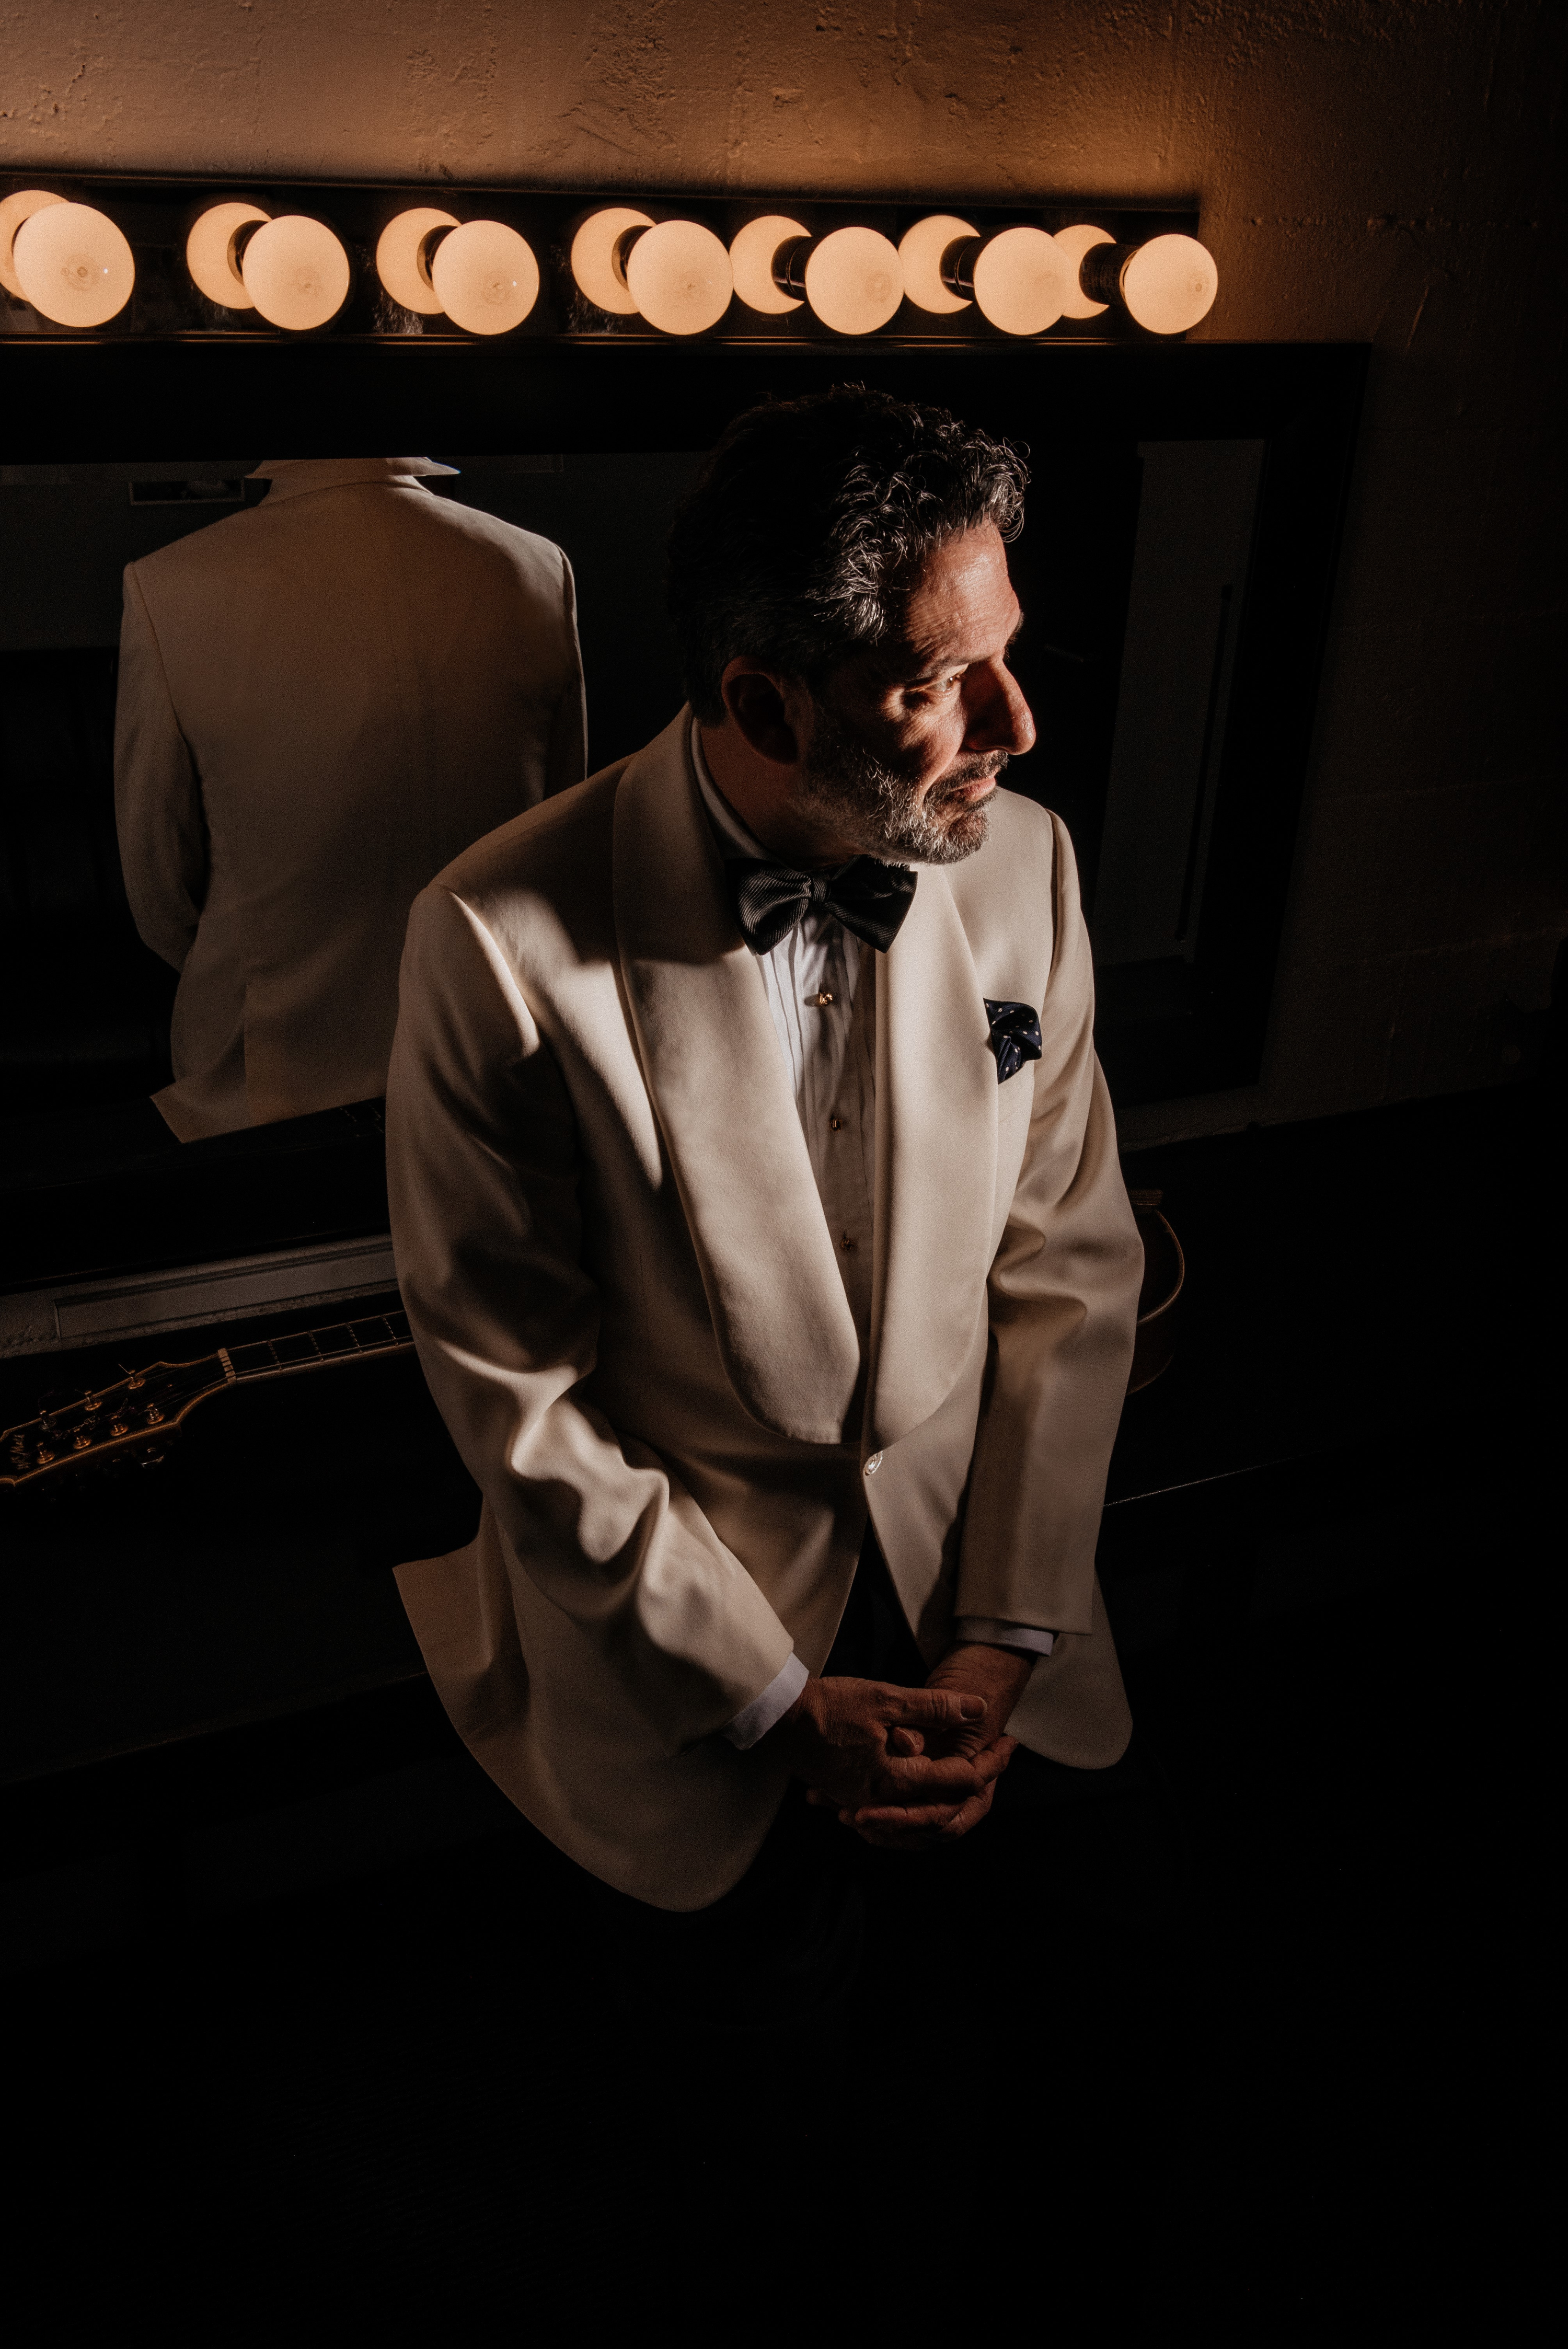 An Ode to Theater and Film on John Pizzarelli's 'Stage & Screen'